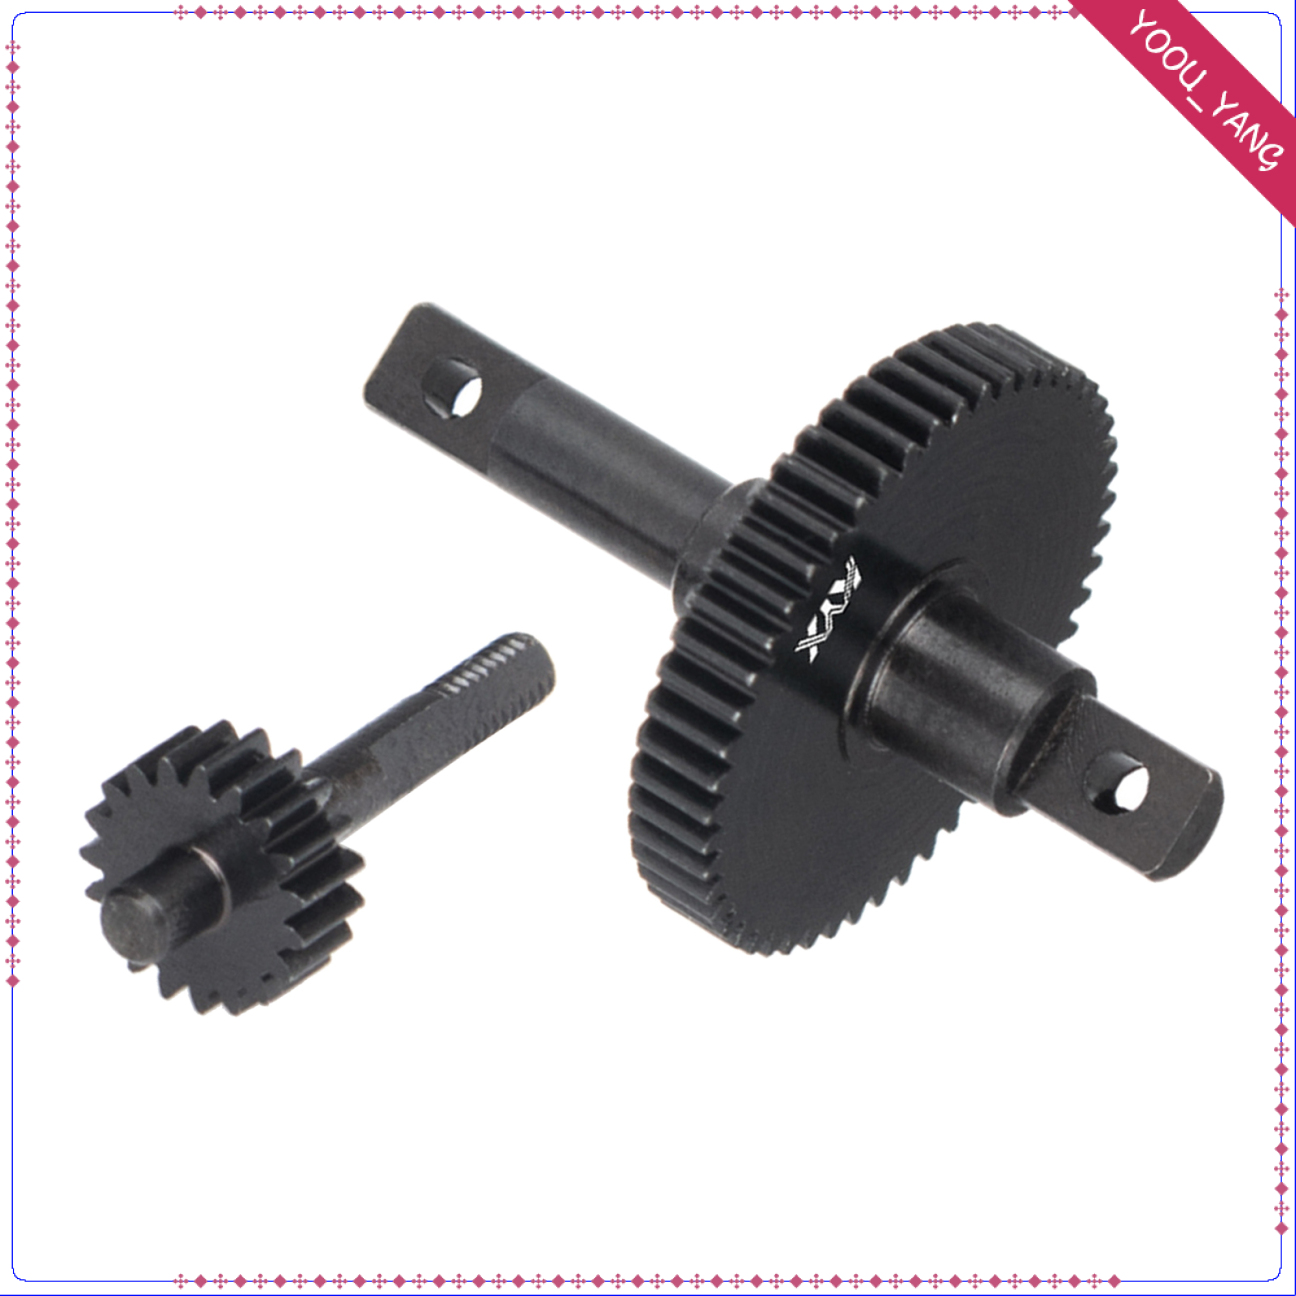 Strengthened 51T//19T Gearbox Gear Transmission for Axial SCX24 RC Crawler Car